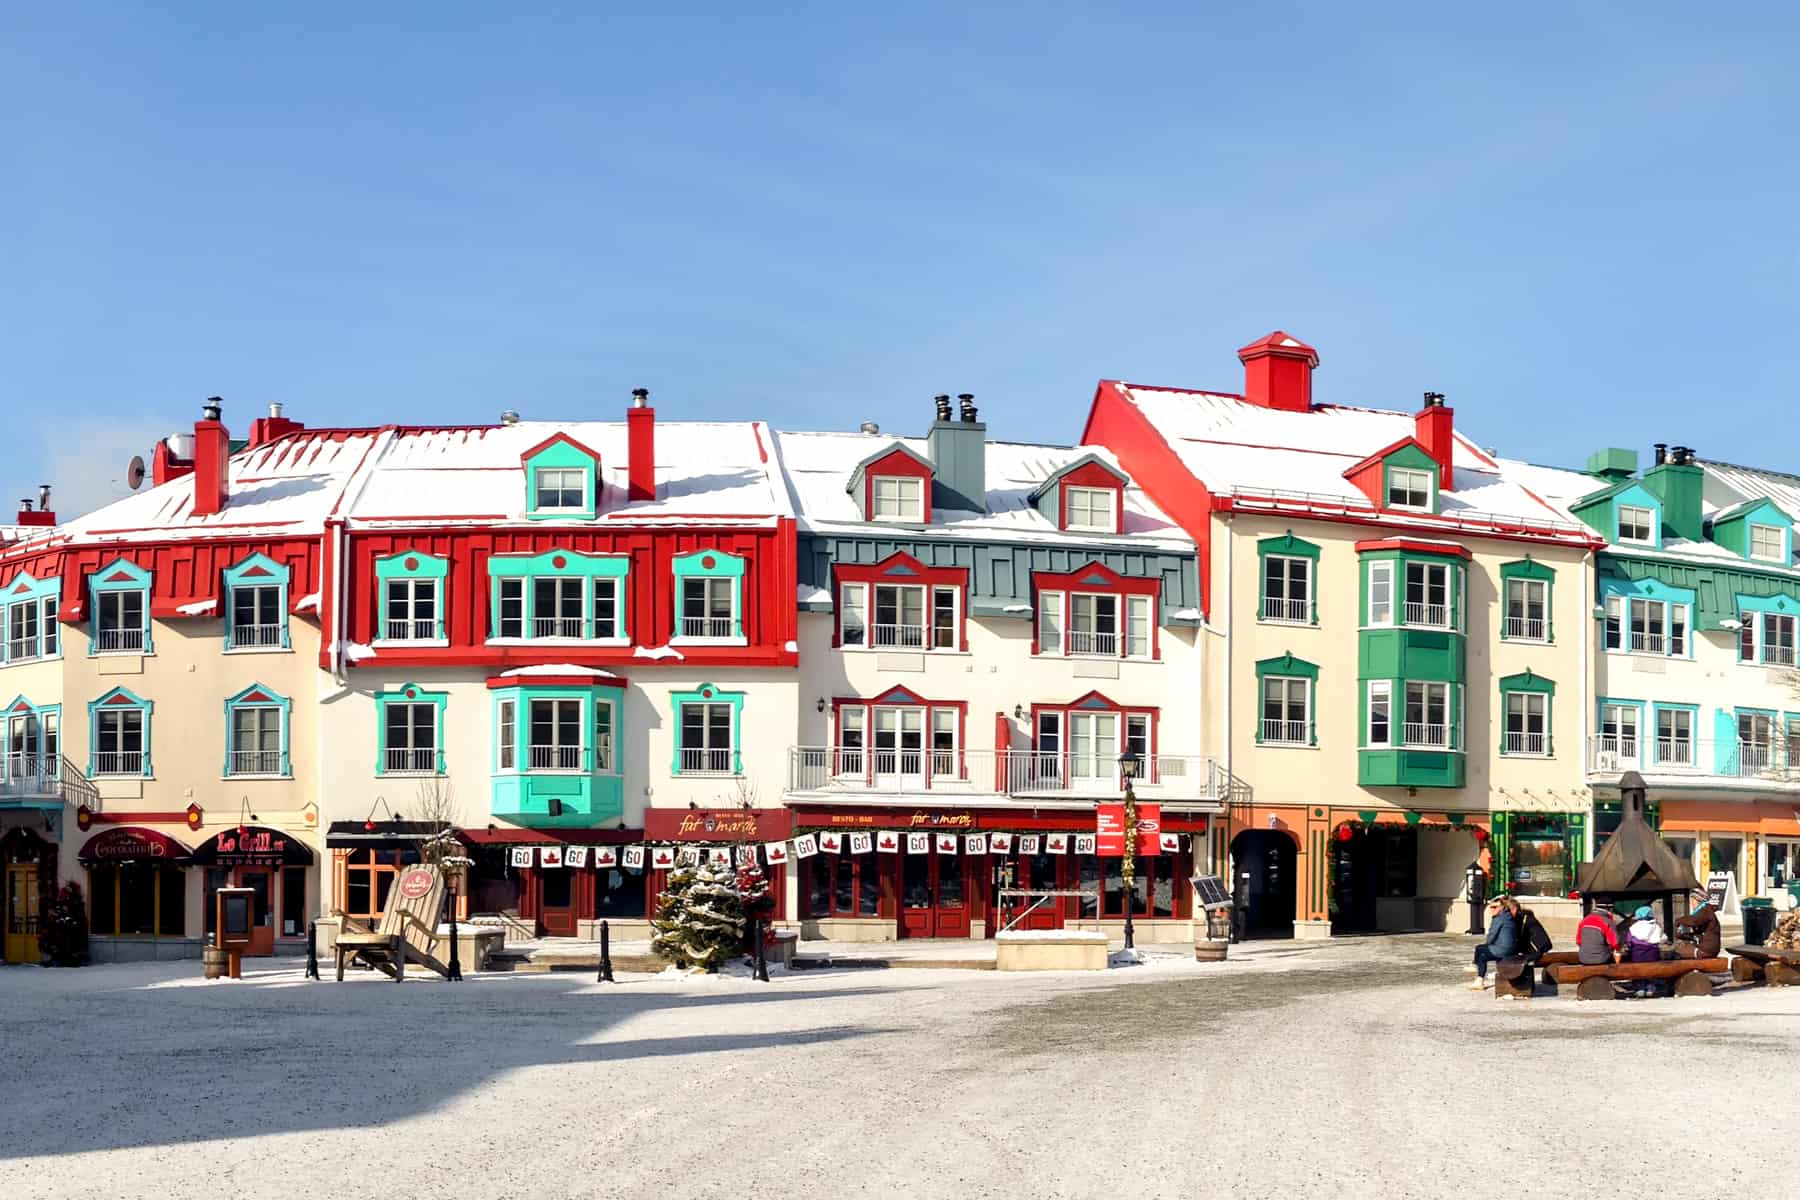 A row of buildings painted in red, mint green and yellow in Mont Tremblant's winter village.